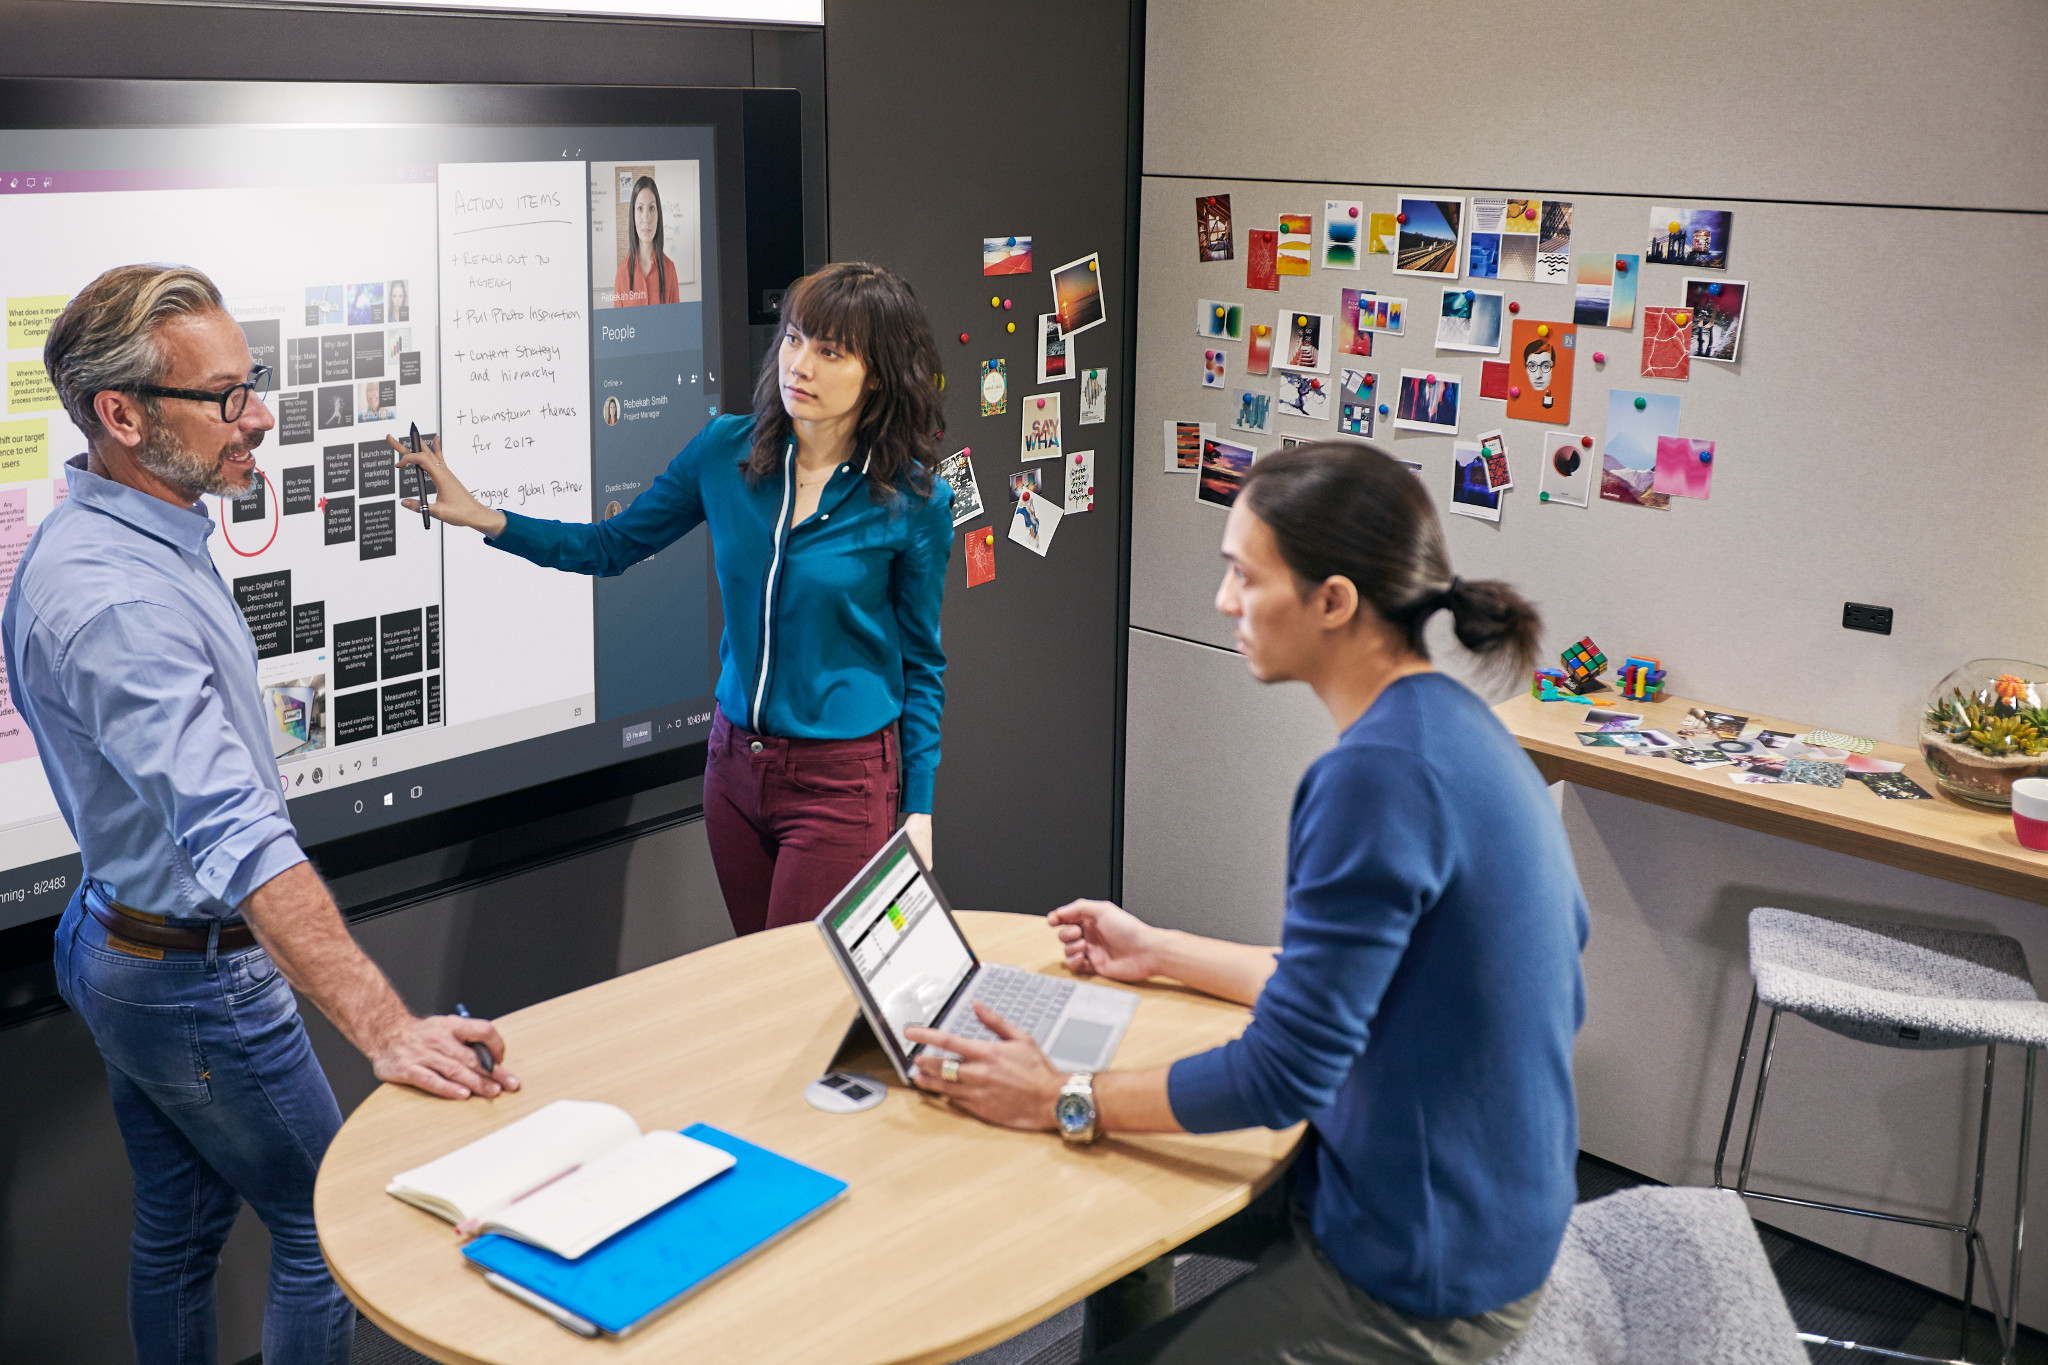 Ideation Hub: A high-tech destination that encourages active participation and equal opportunity to contribute as people co-create, refine and share ideas with co-located or distributed teammates on Microsoft Surface Hub.